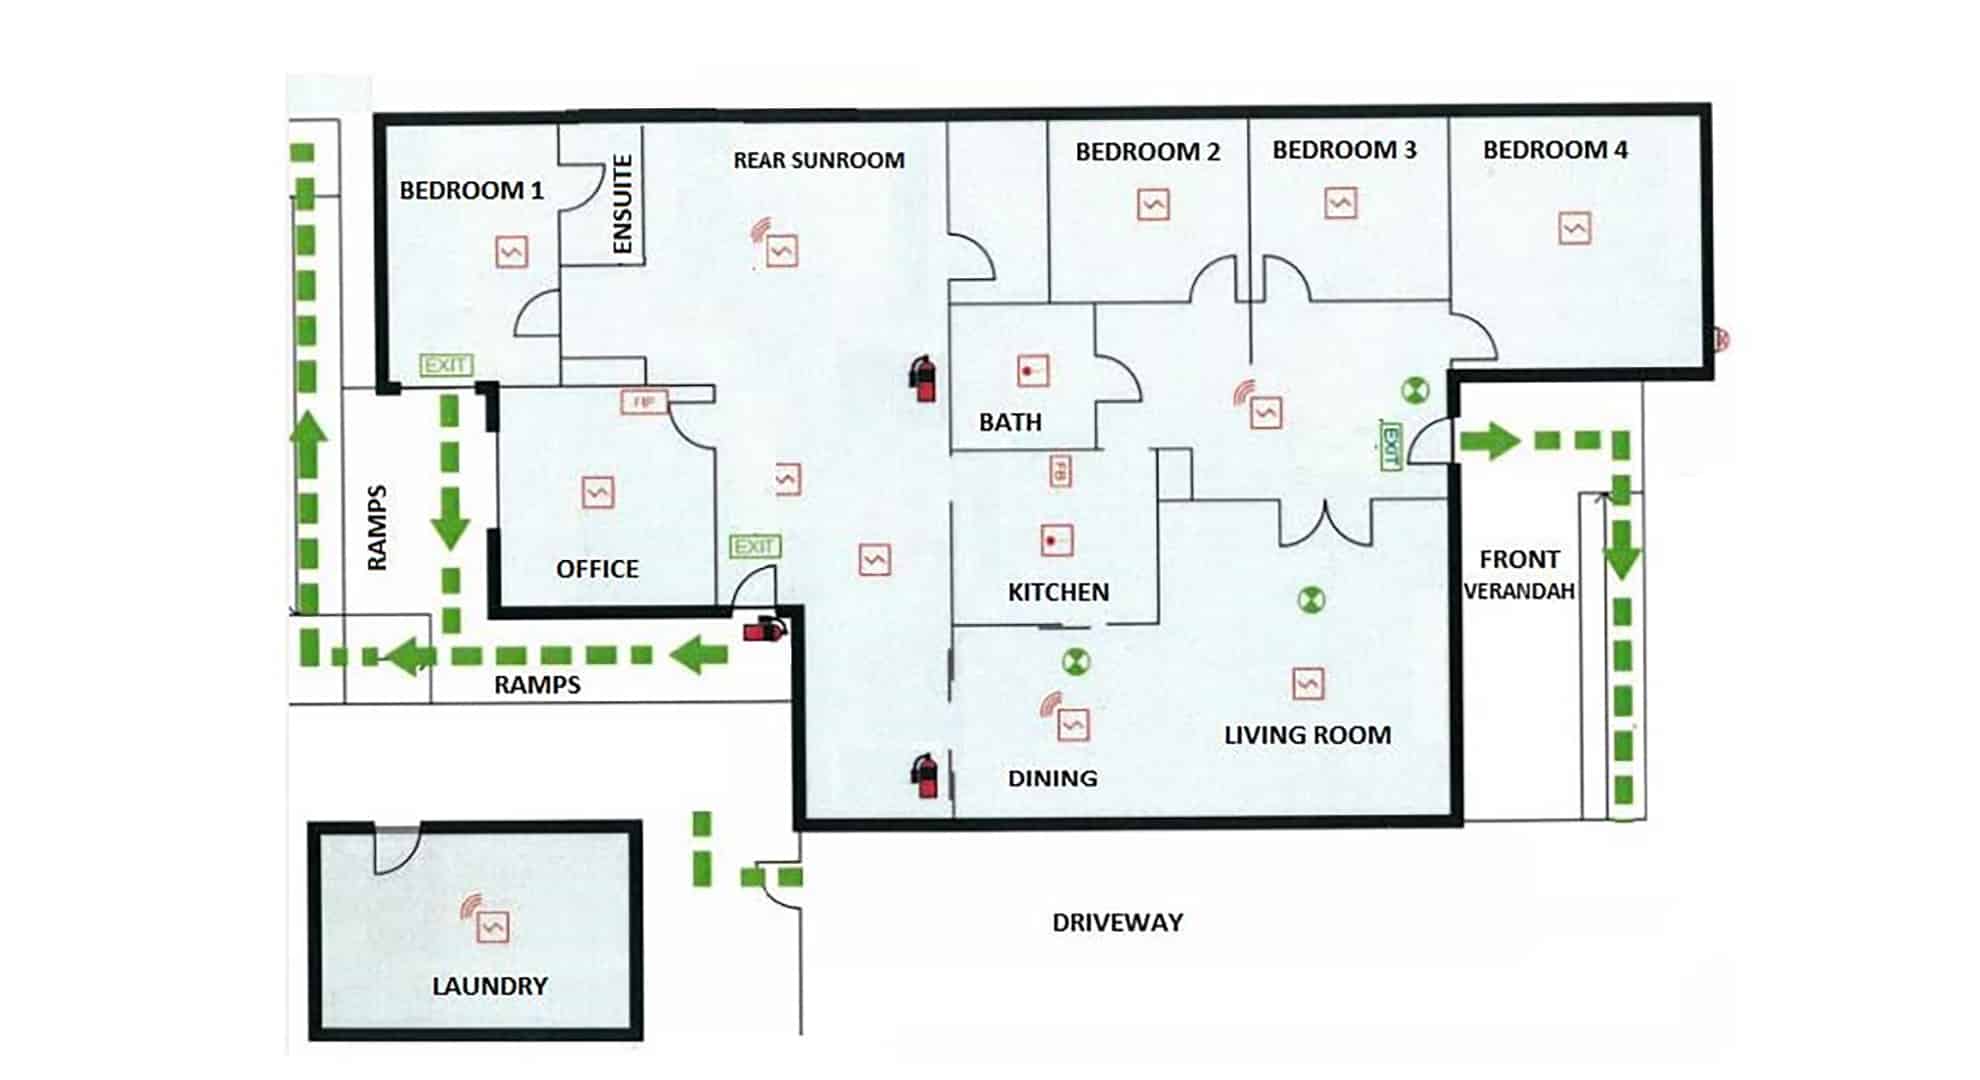 The floor plan of the Denistone 1 property